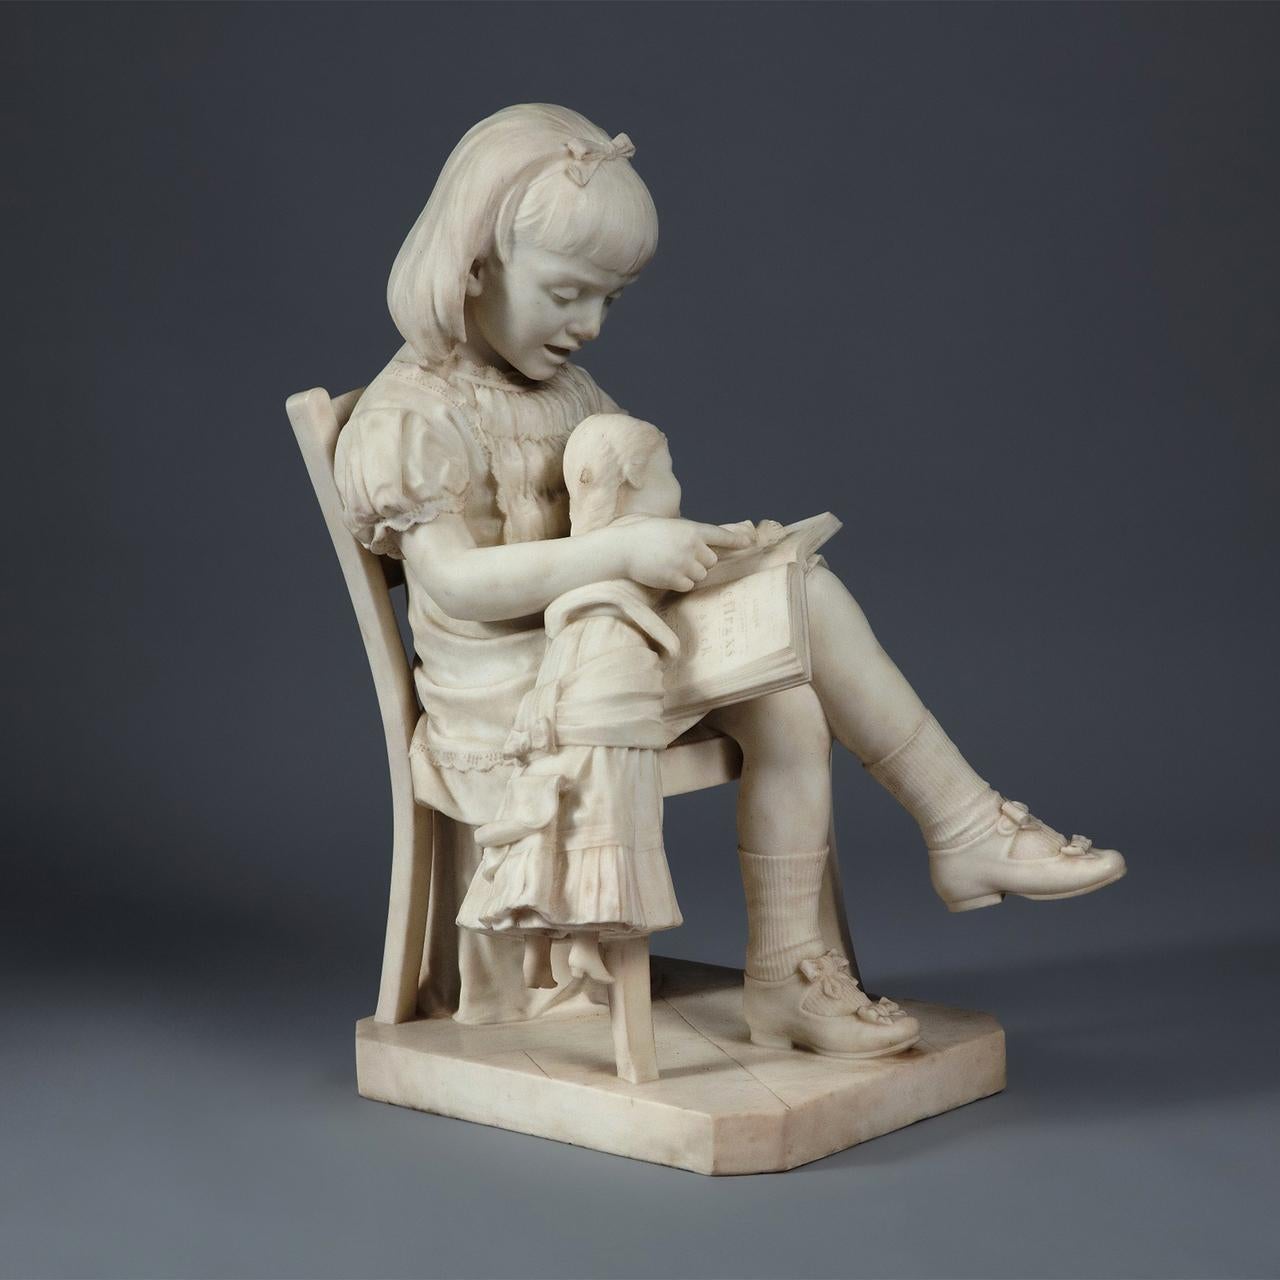 A signed finely carved Italian Carrara marble sculpture of a girl reading to her doll siting on a chair.

Title: La Lezione Di Lettura
Artist: L. Tolducci (19th century); Italian School
Date: 19th century
Dimension: 31 in. x 20 in. x 25 in.